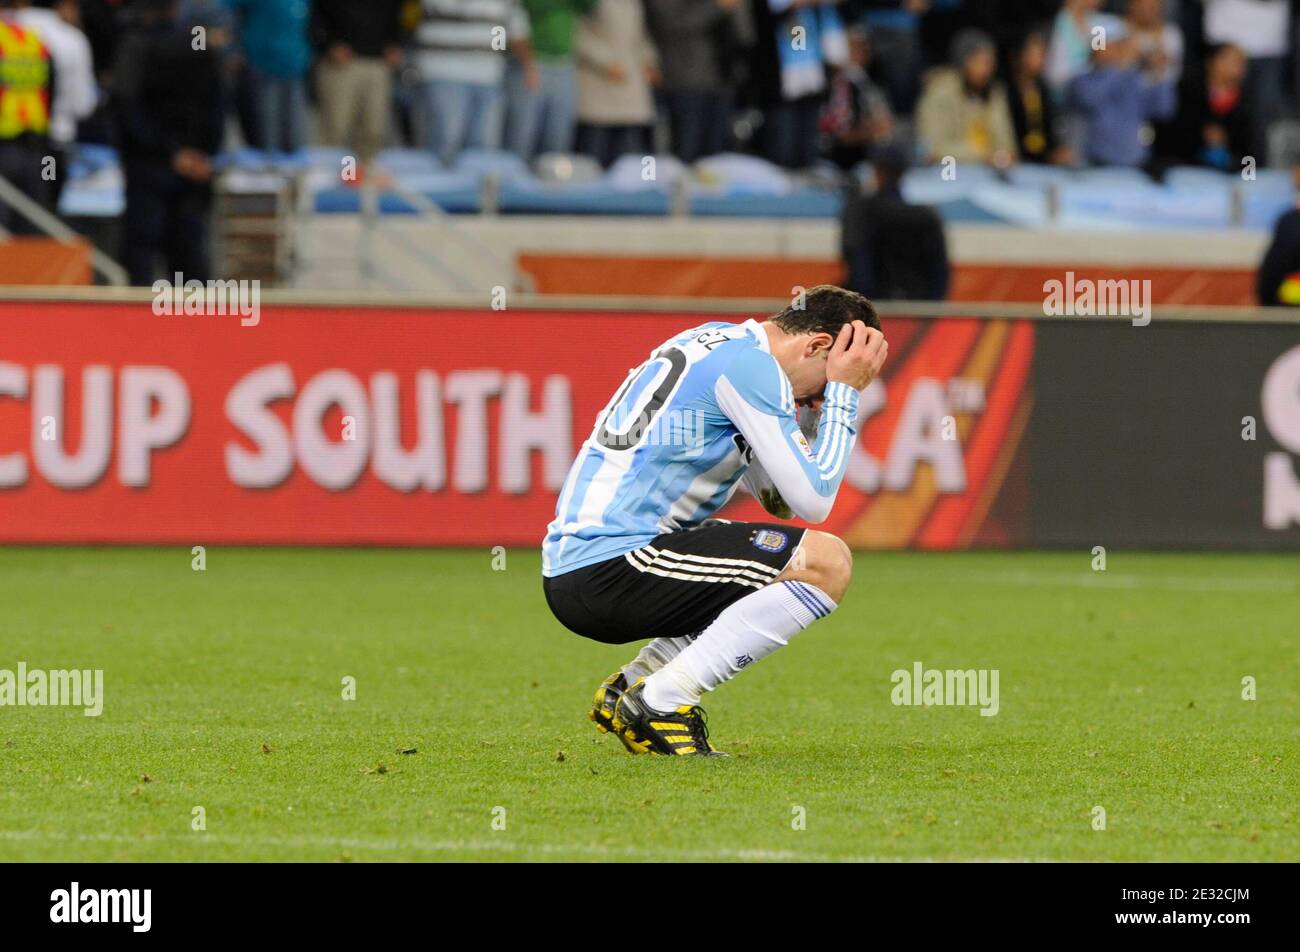 Argentina's Maxi Rodriguez frustration during the 2010 FIFA World Cup South Africa 1/4 of final Soccer match, Argentina vs Germany at Green Point football stadium in Johannesburg, South Africa on July 3rd, 2010. Germany won 4-0. Photo by Henri Szwarc/ABACAPRESS.COM Stock Photo